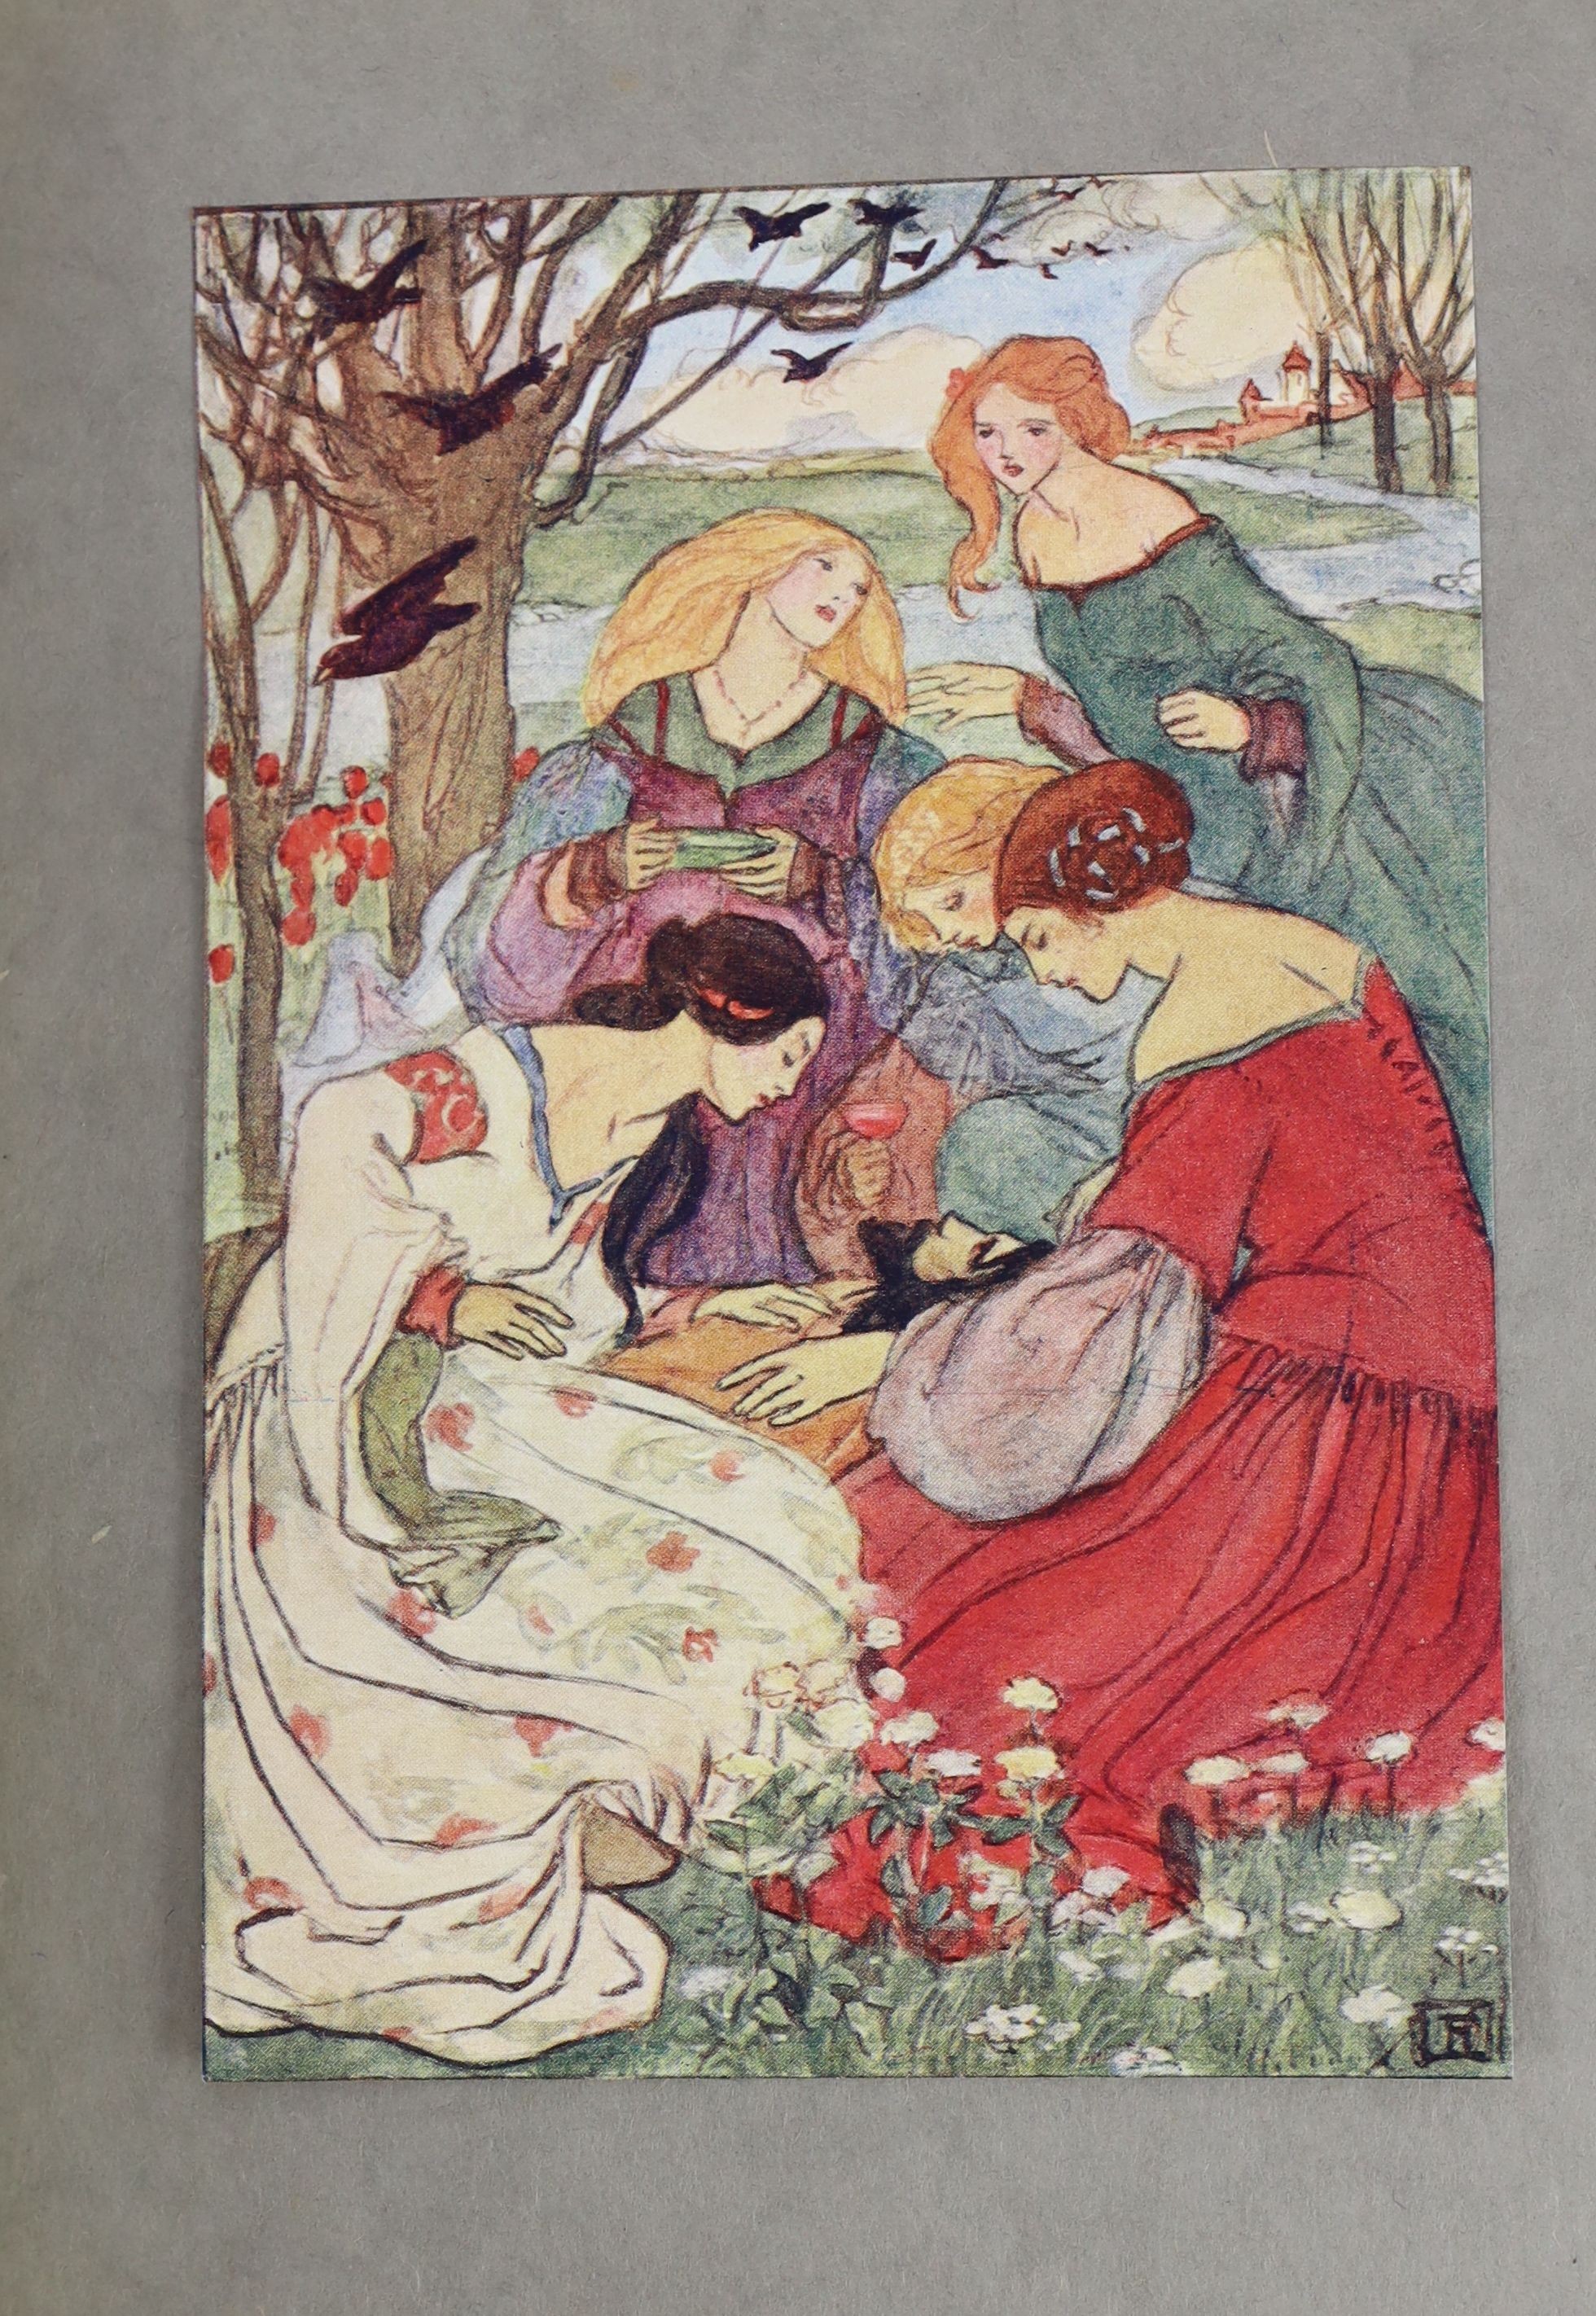 Rossetti, Christina Georgina - Poems, illustrated by Florence Harrison, 4to, cloth gilt, with 36 tipped-in colour plates, introduction by Alice Meynell, London, 1910